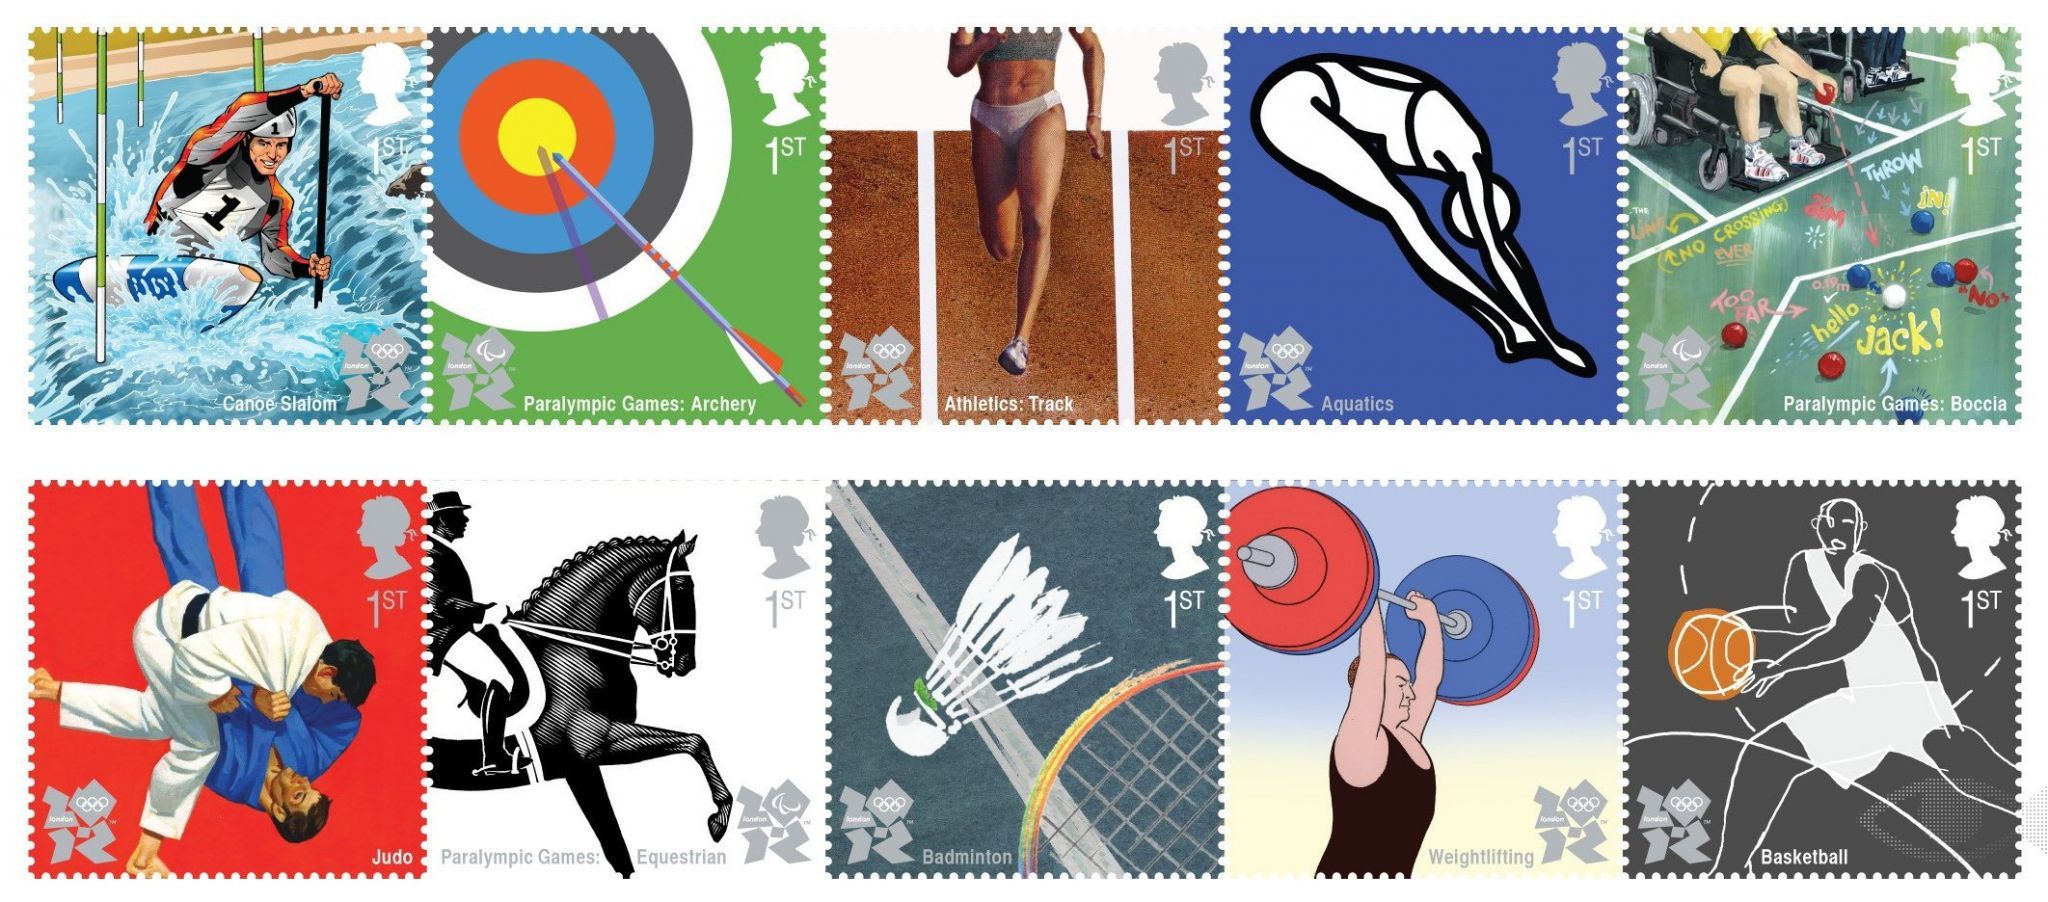 /assets/contentimages/Olympic_Stamps_Series_for_London_2012.jpg